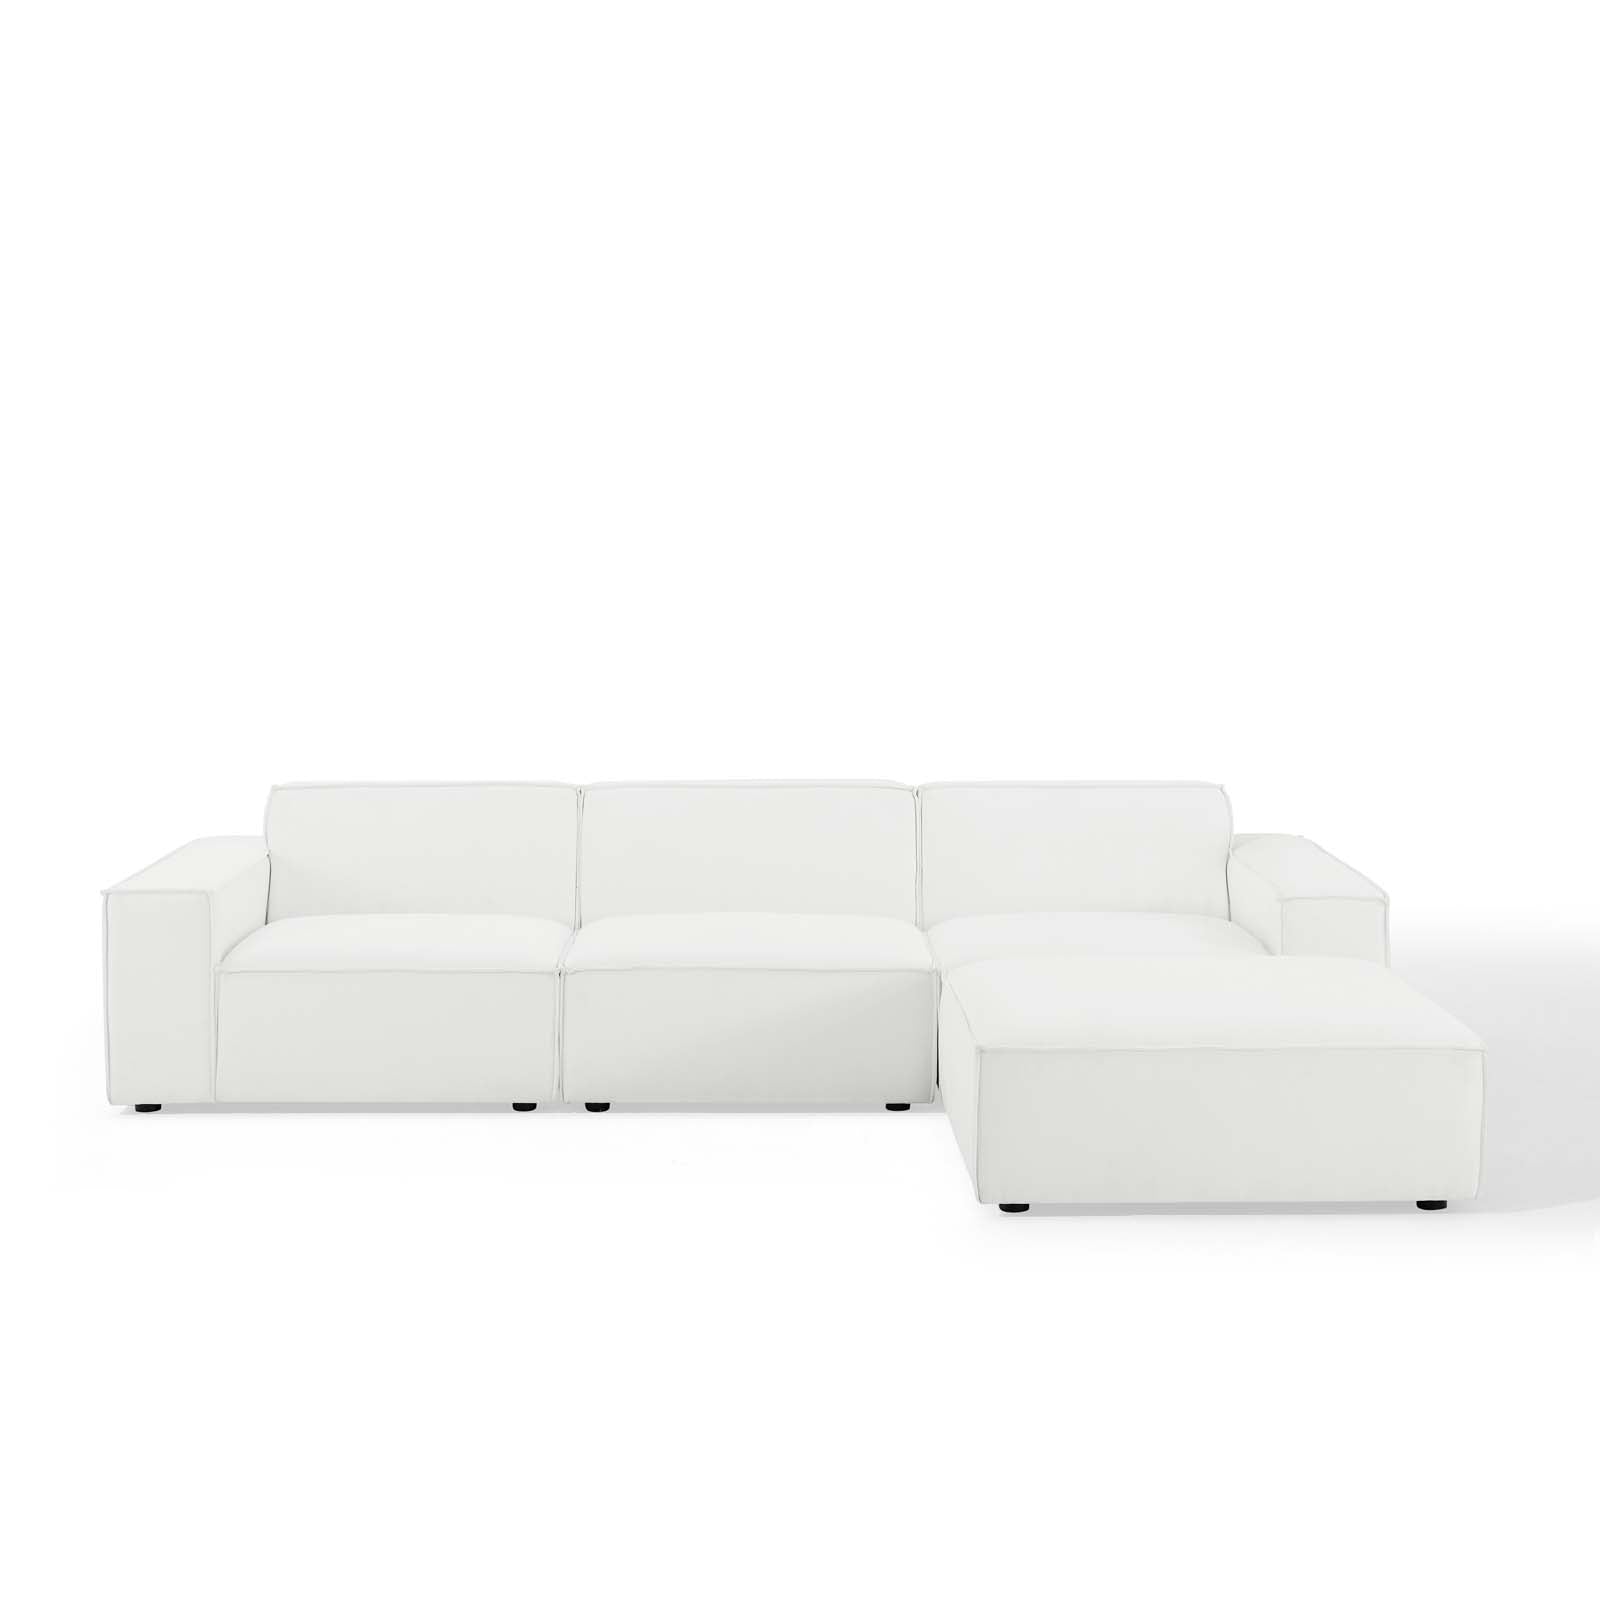 Modway Sectional Sofas - Restore 4 Piece Sectional Sofa White 123"W